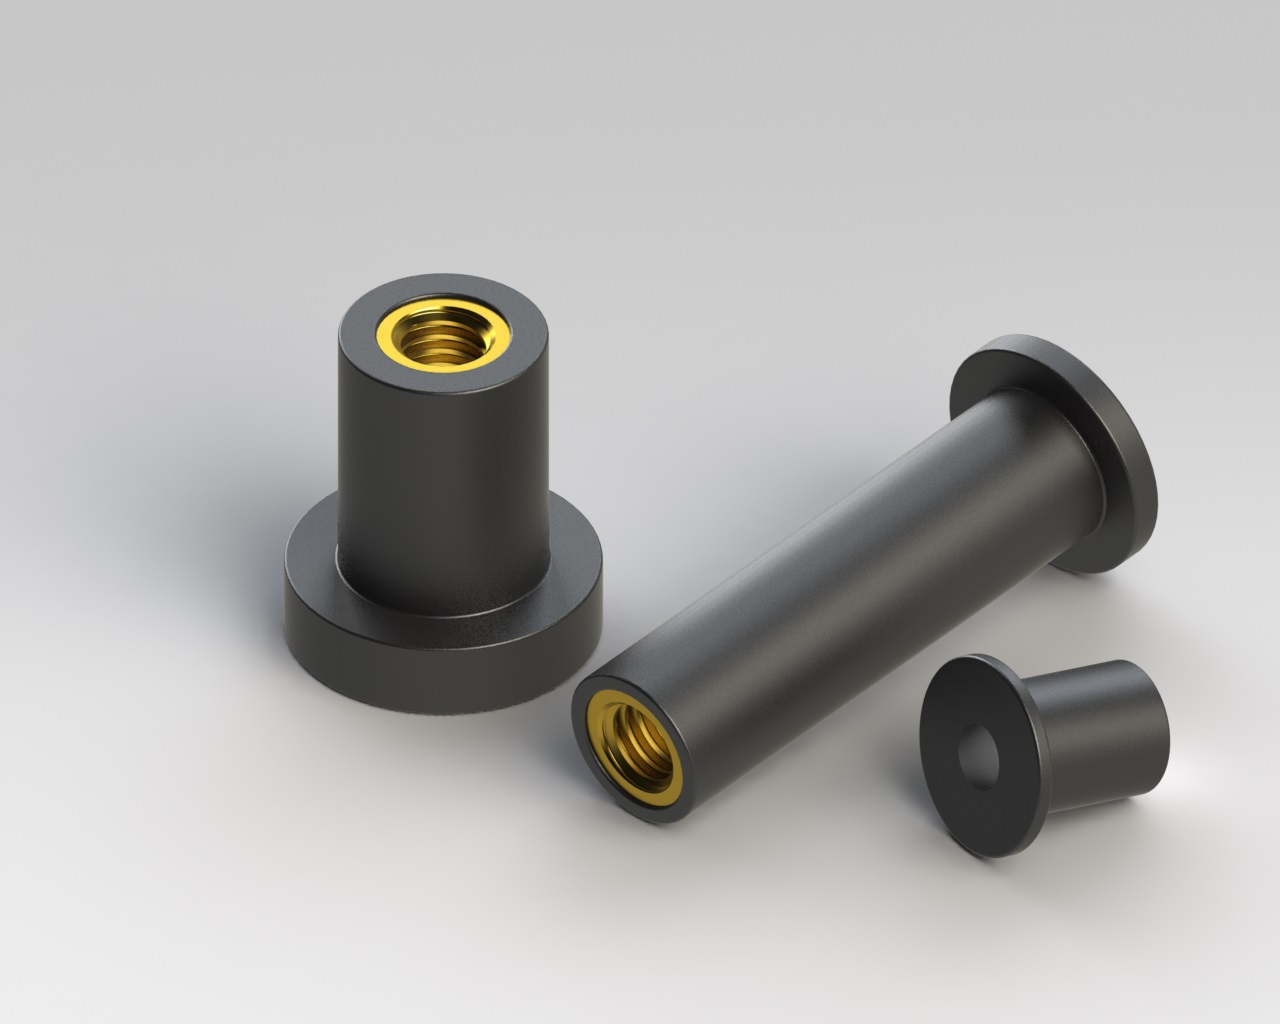 Deformable rubber threaded inserts